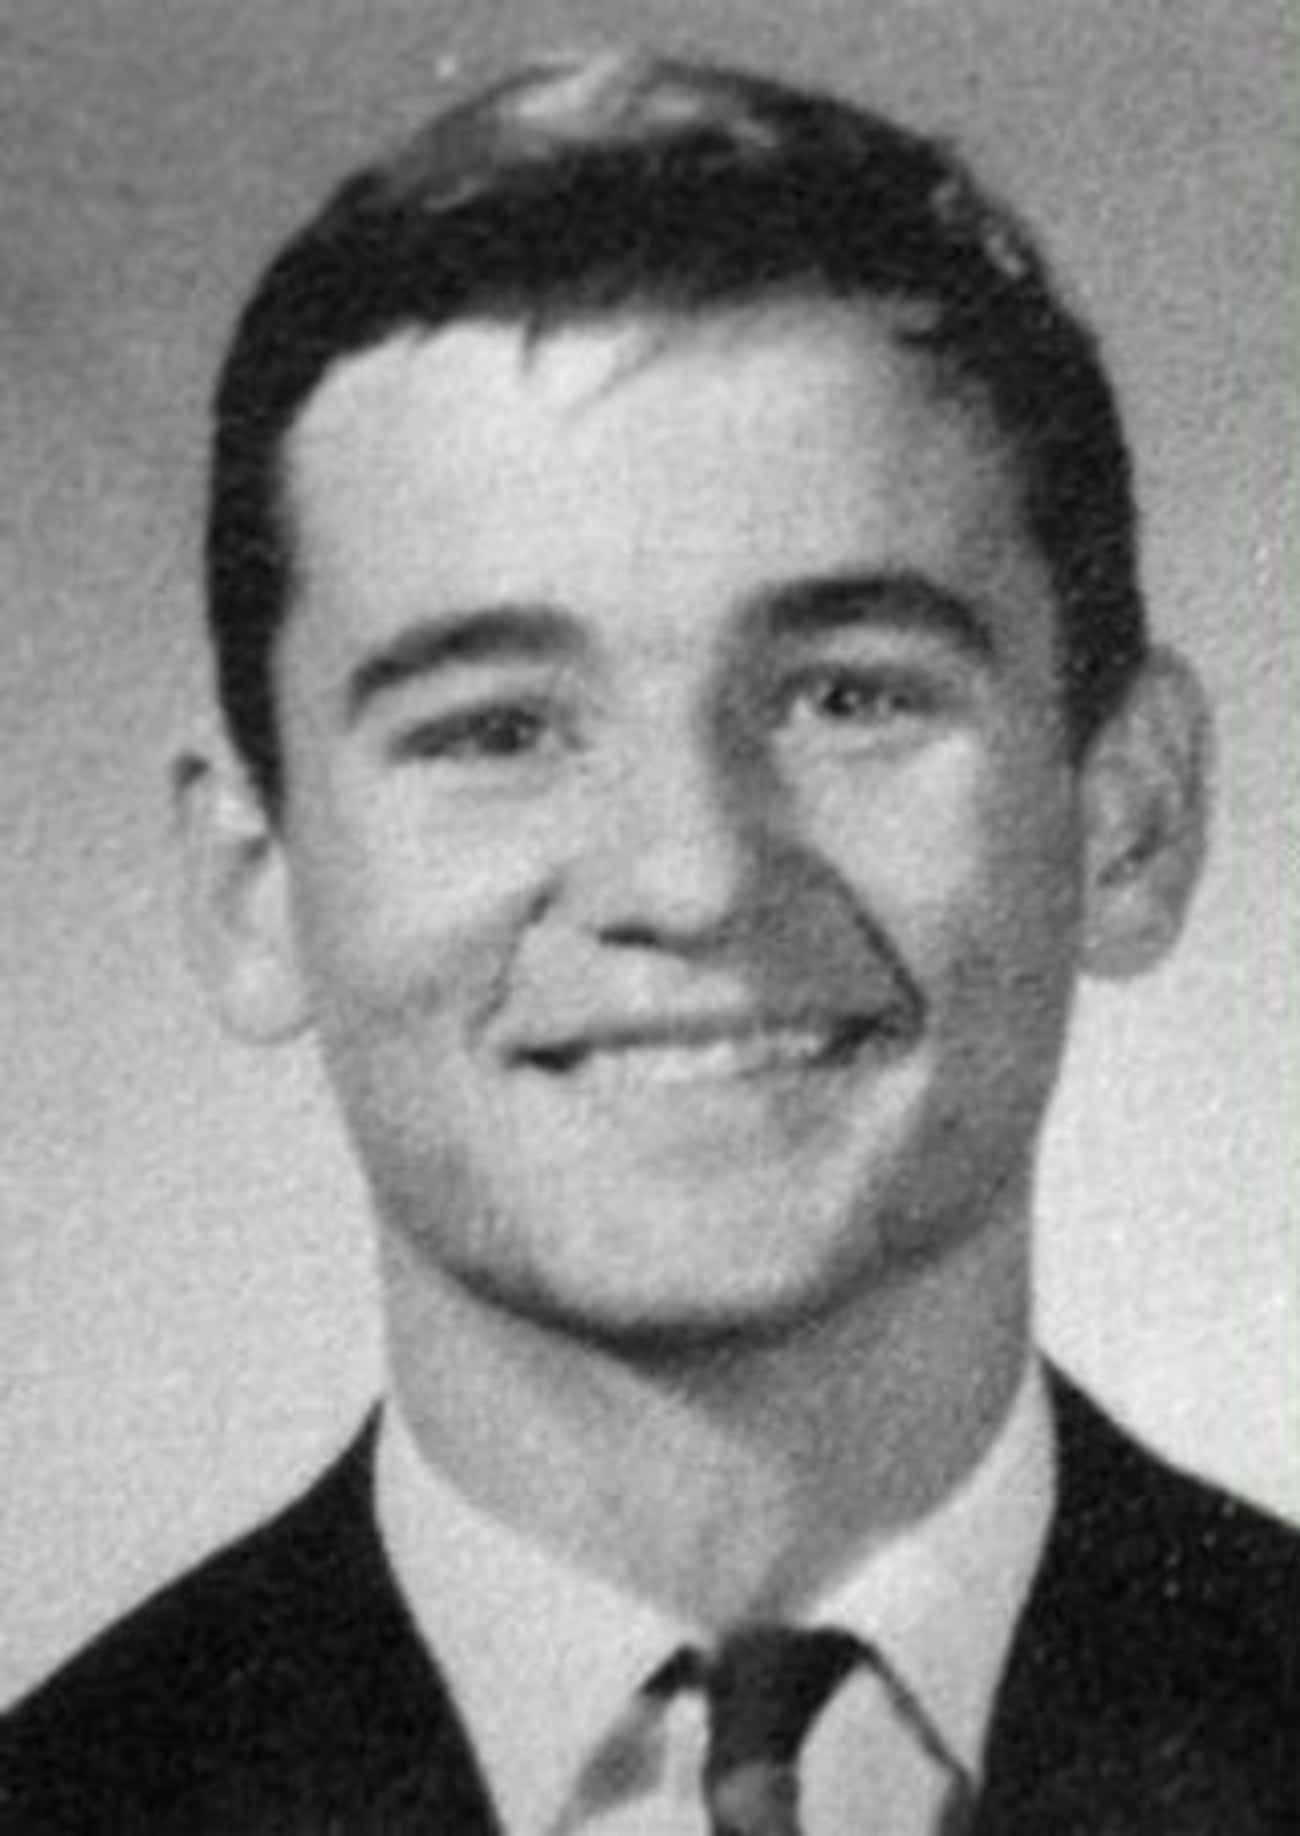 young-bill-murray-in-suit-and-tie-photo-u1